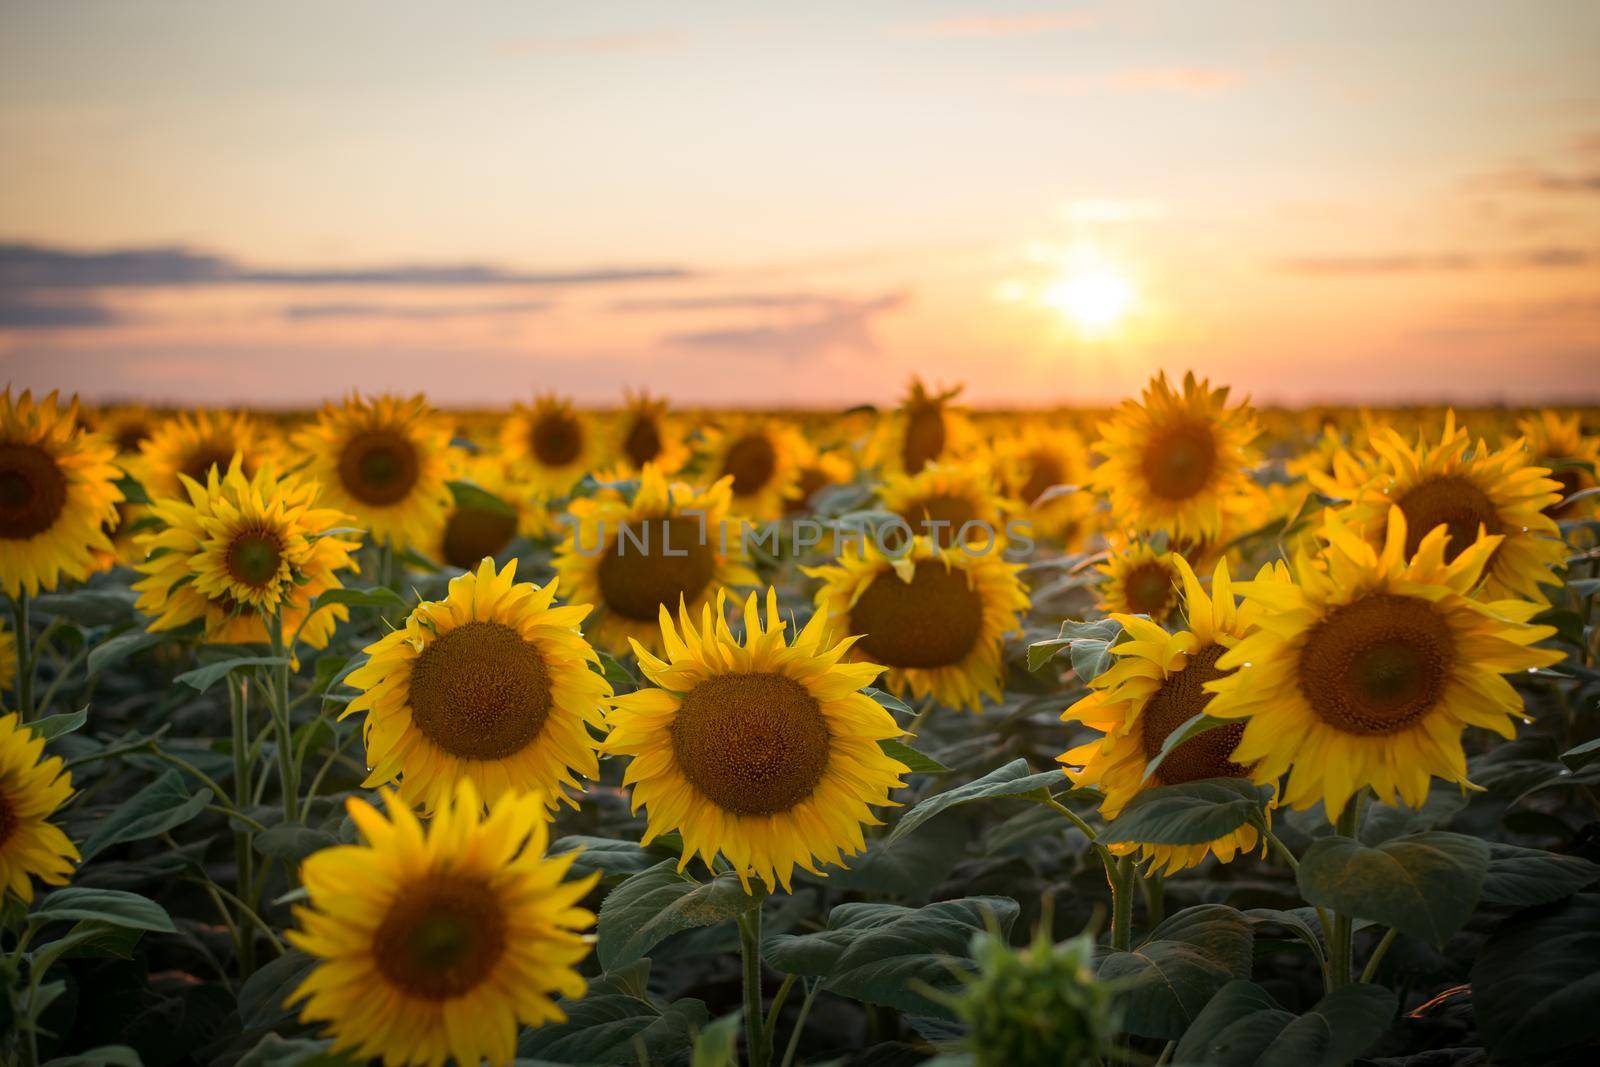 Sunflowers blooming in the endless field just before sun touches horizon and disappear from view